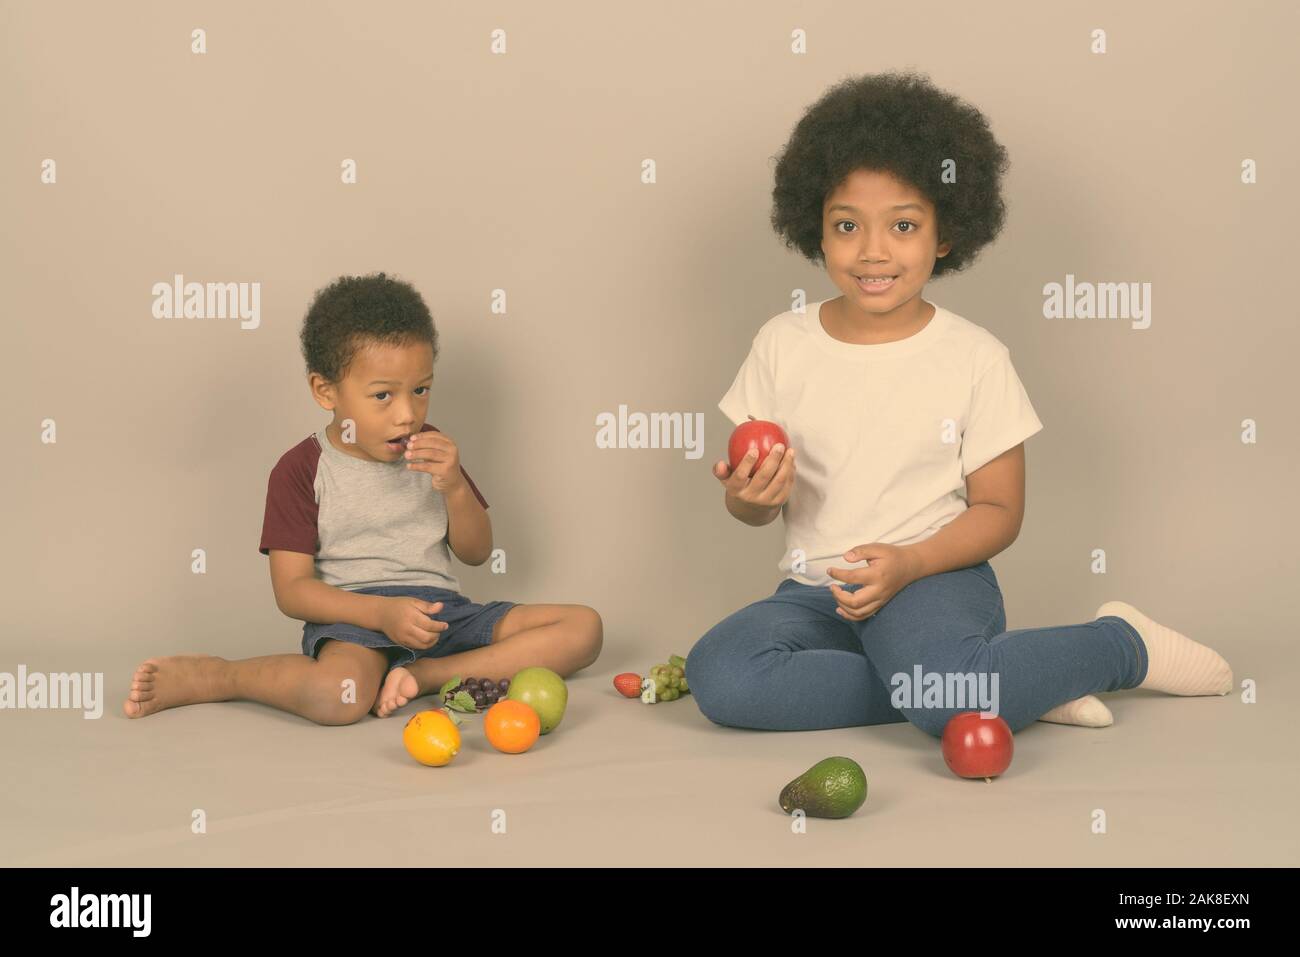 Young cute African siblings together against gray background Stock Photo